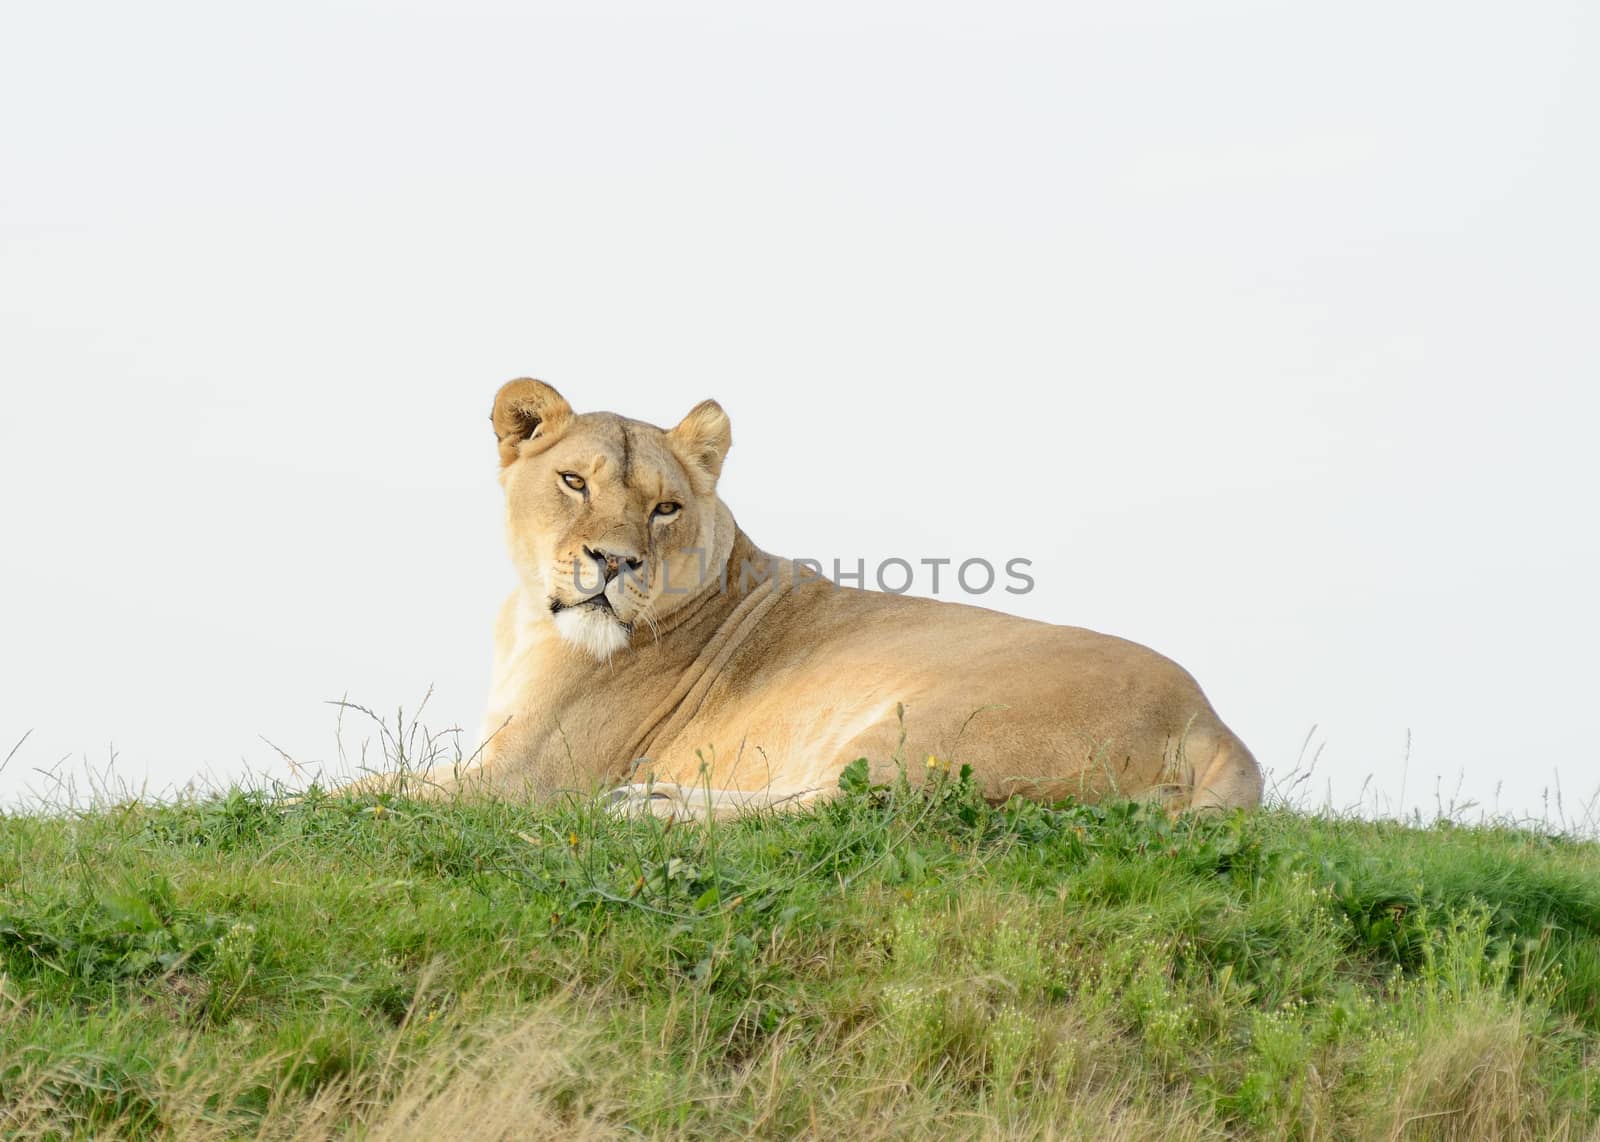 Lioness looks Alert by kmwphotography